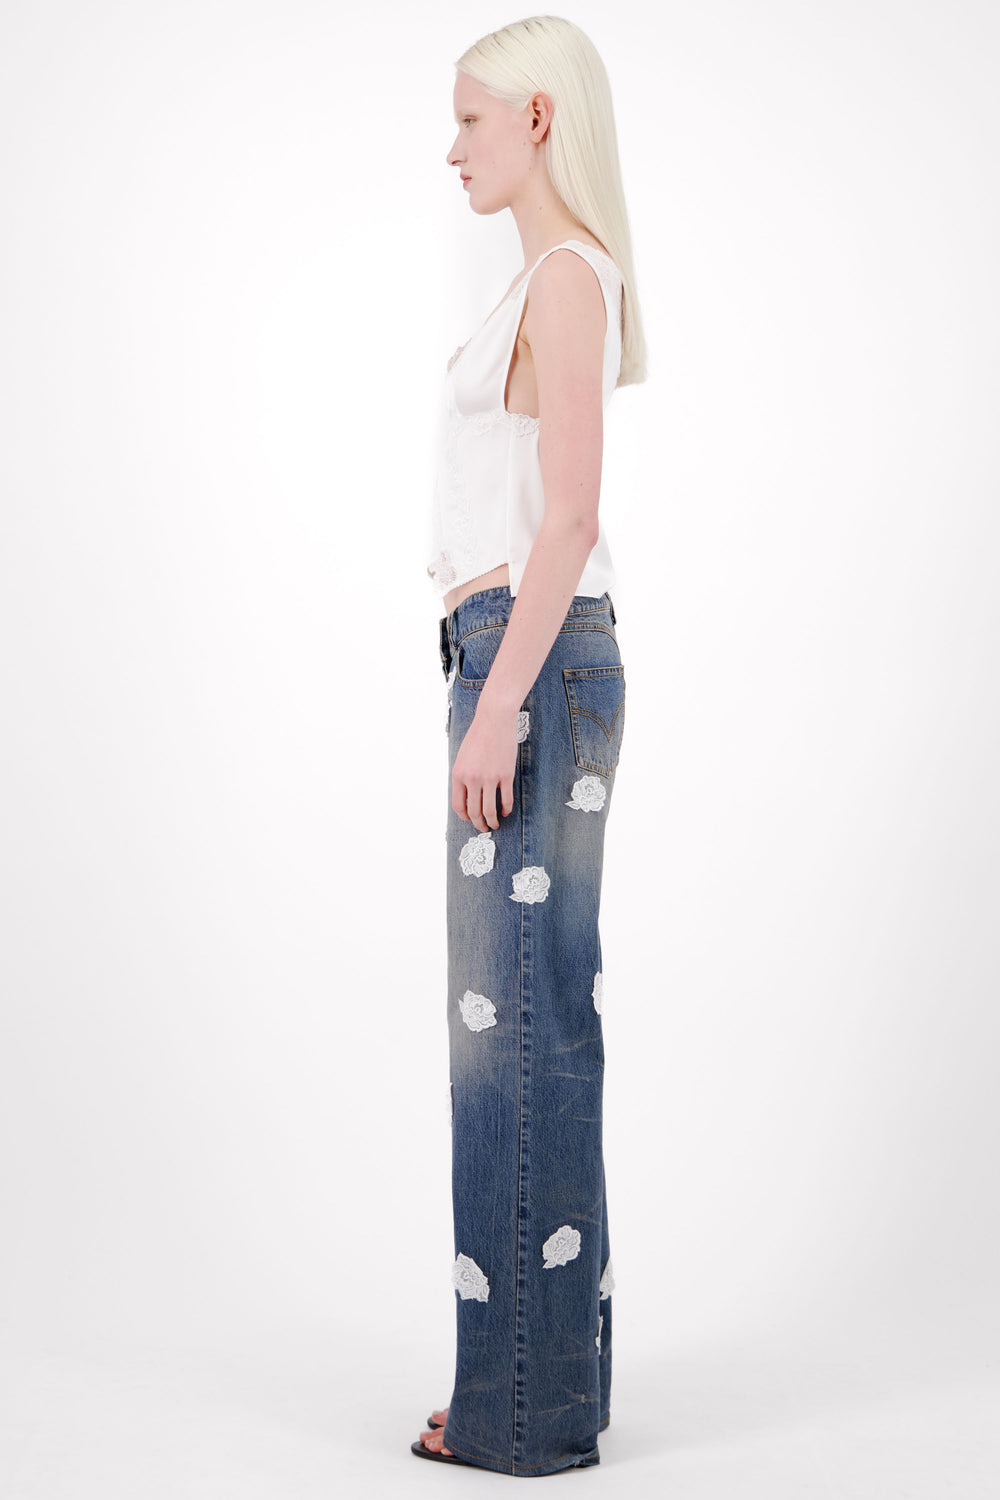 V-Shape Waist Washed And Stained Denim Jeans W/ Lace Polka Dots